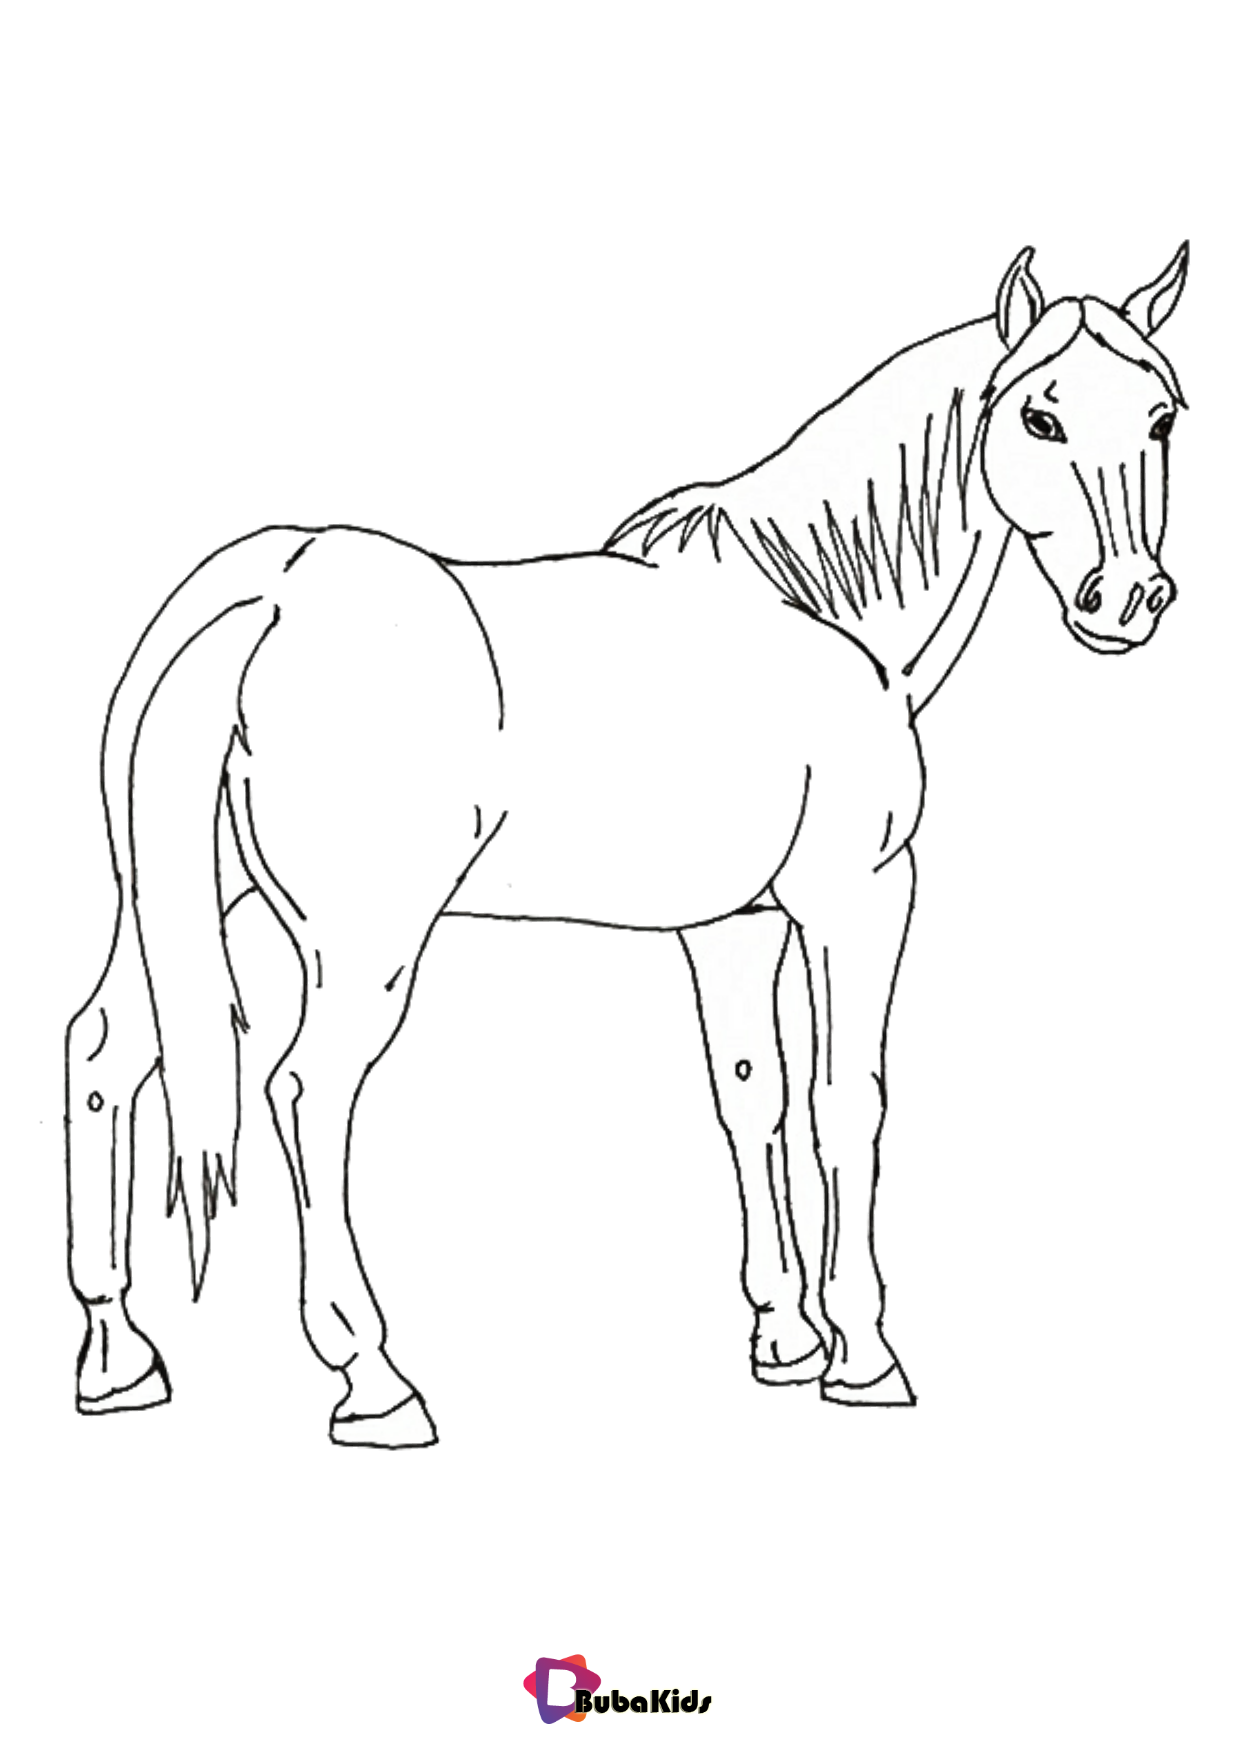 Horse Animal coloring page